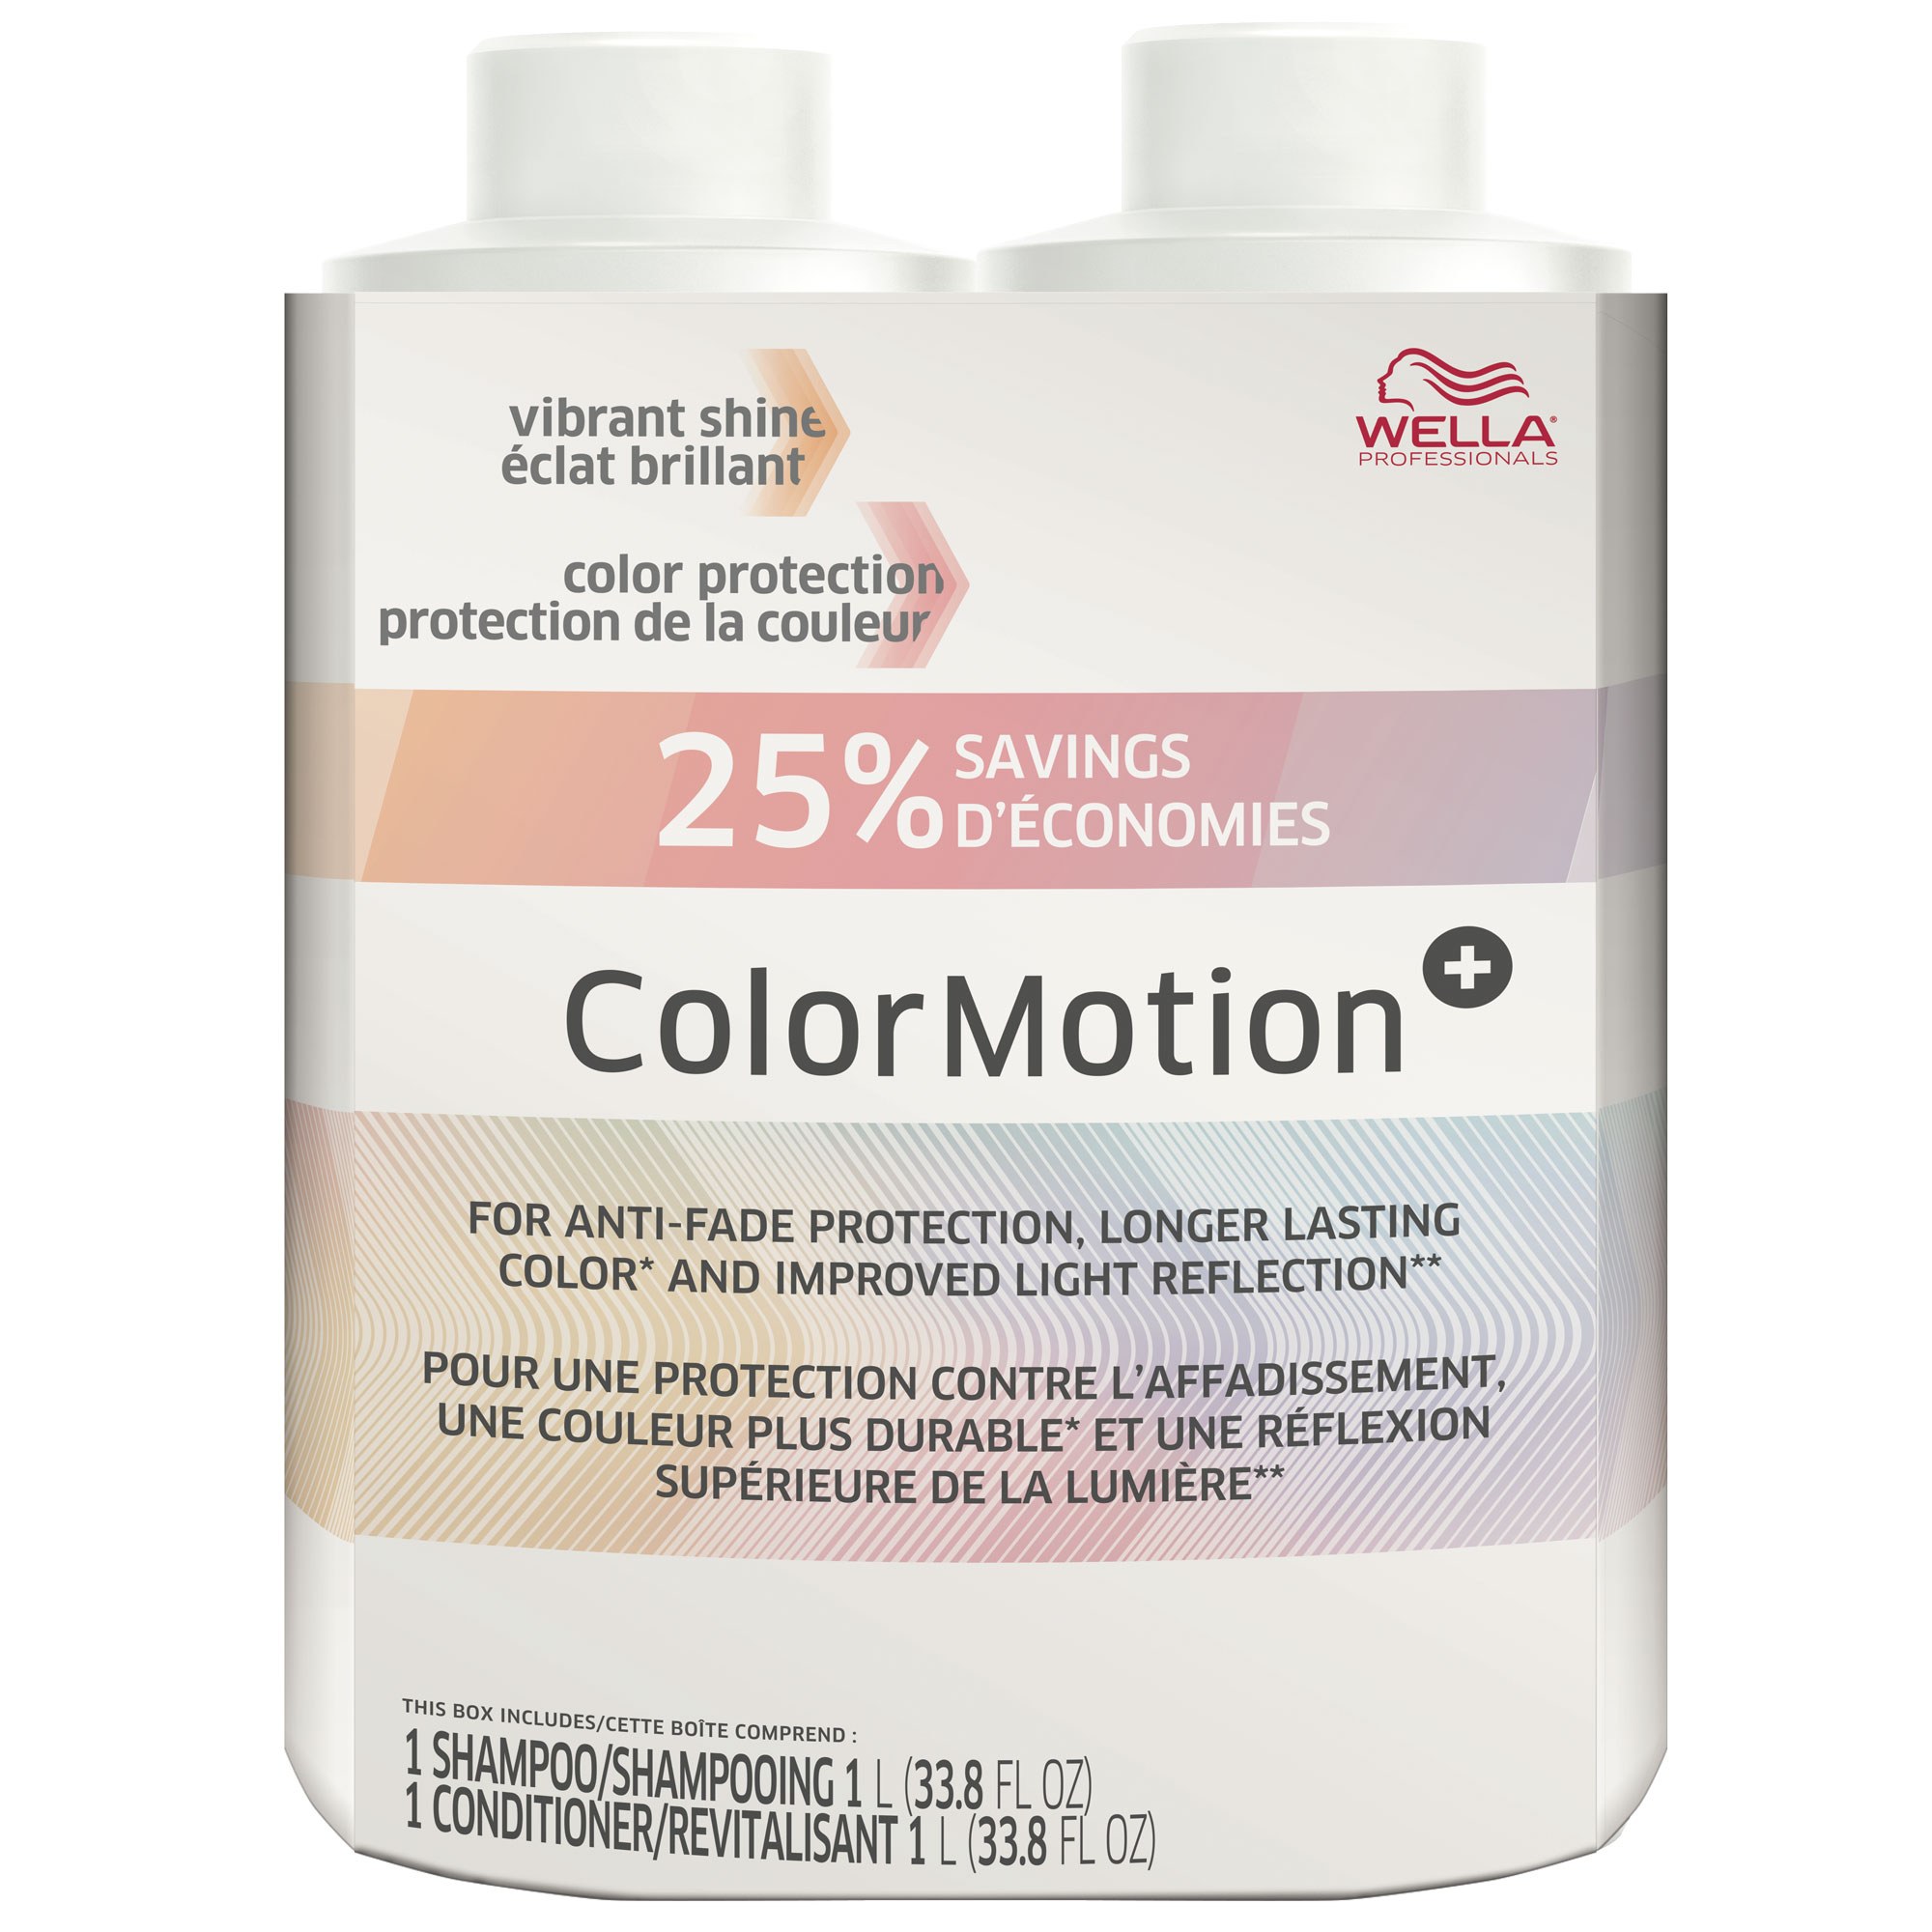 Wella ColorMotion+ Shampoo and Conditioner Liter Duo 